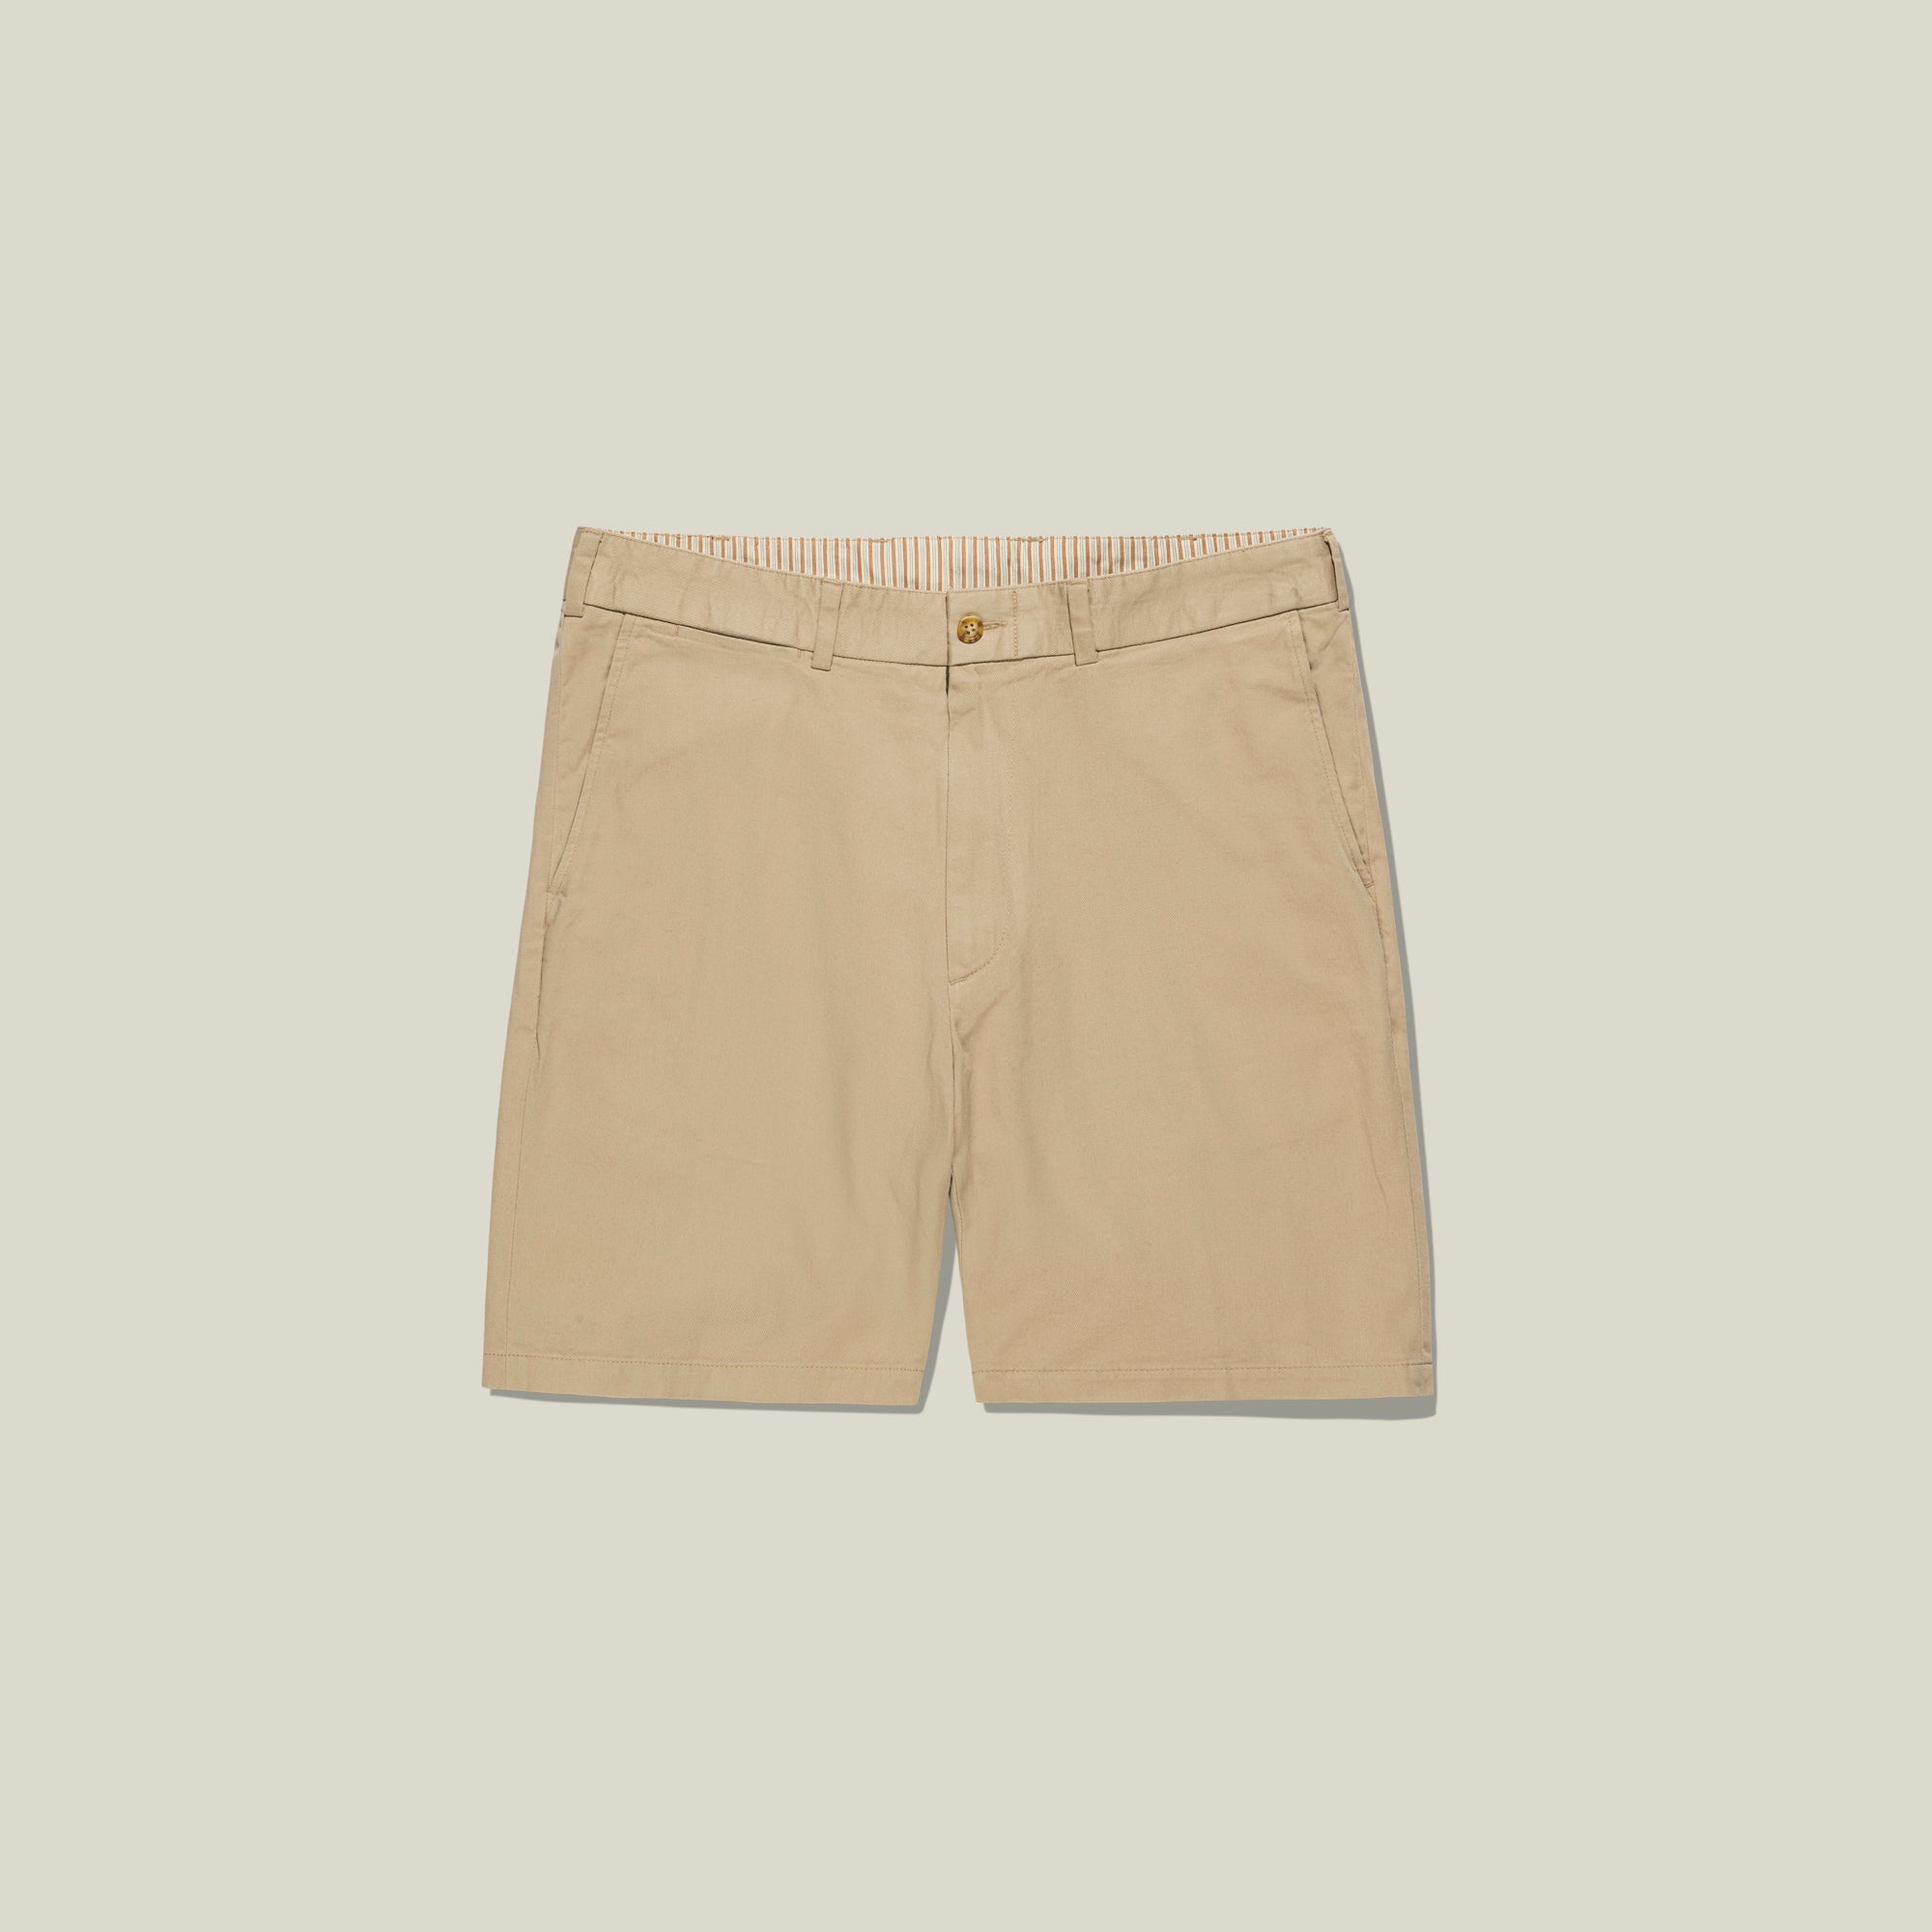 M2S - Classic Fit Short - Vintage Twill